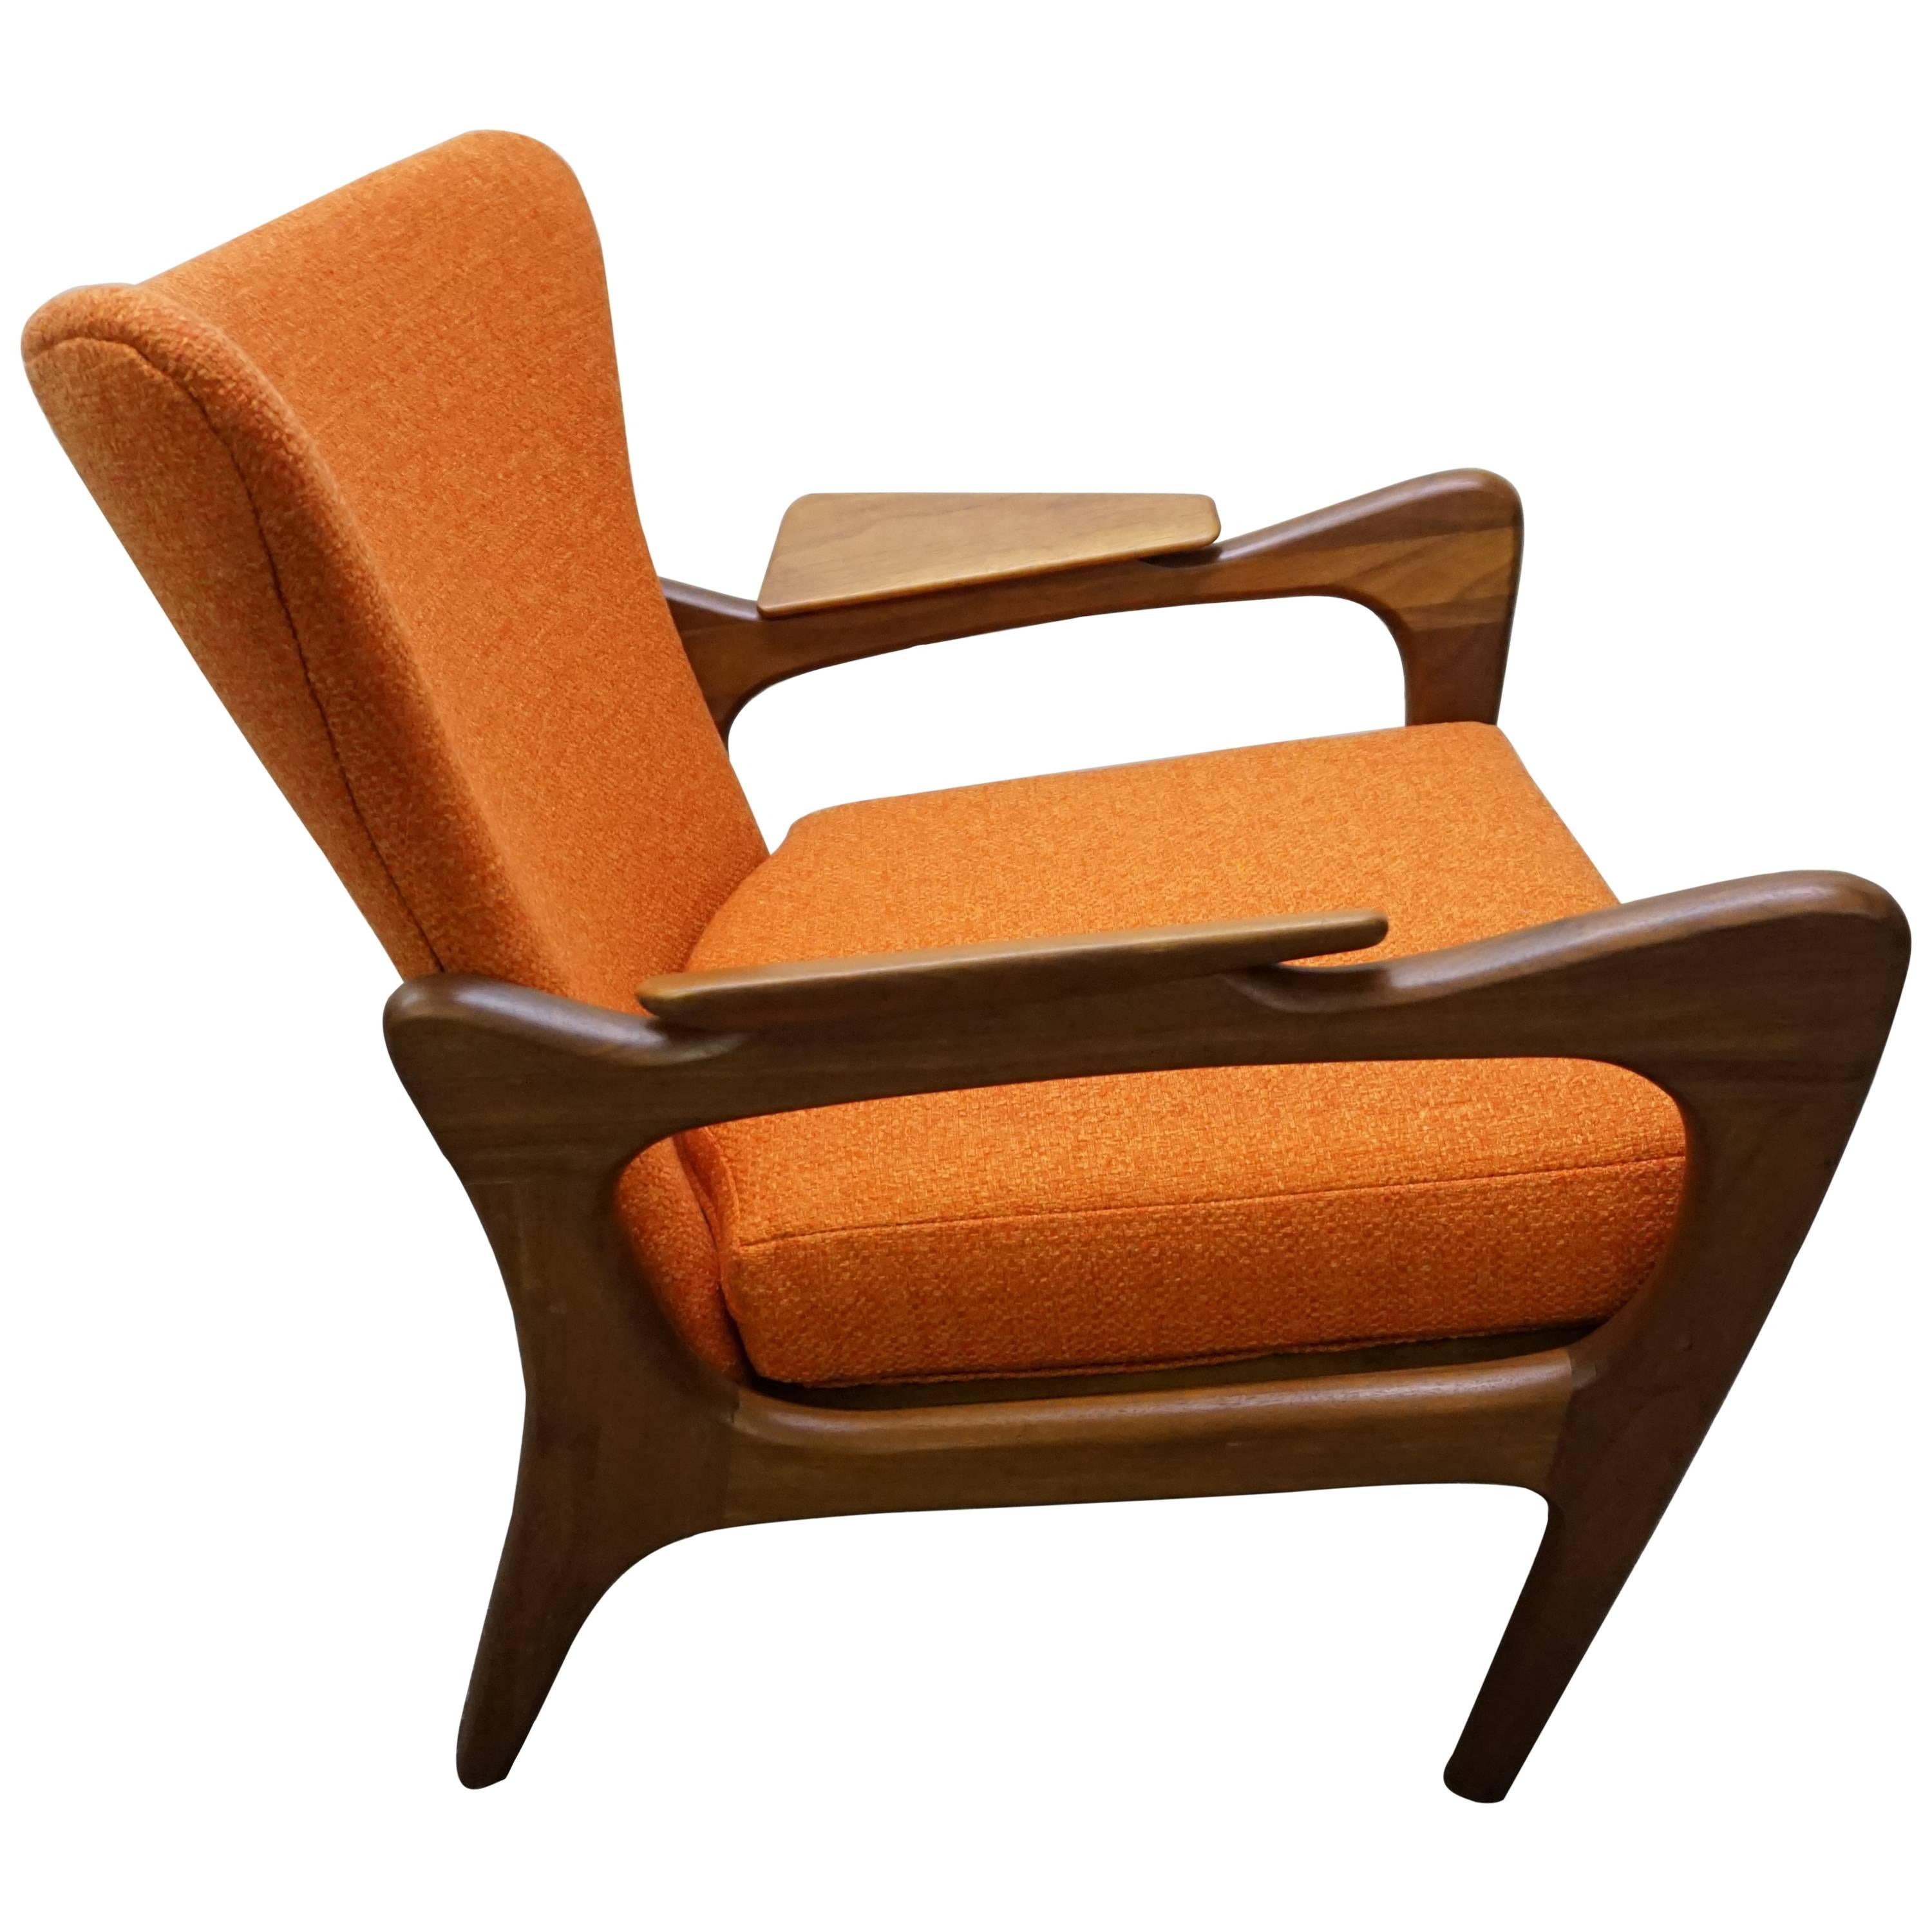 Gorgeous Adrian Pearsall Sculptural Walnut Lounge Chair For Sale